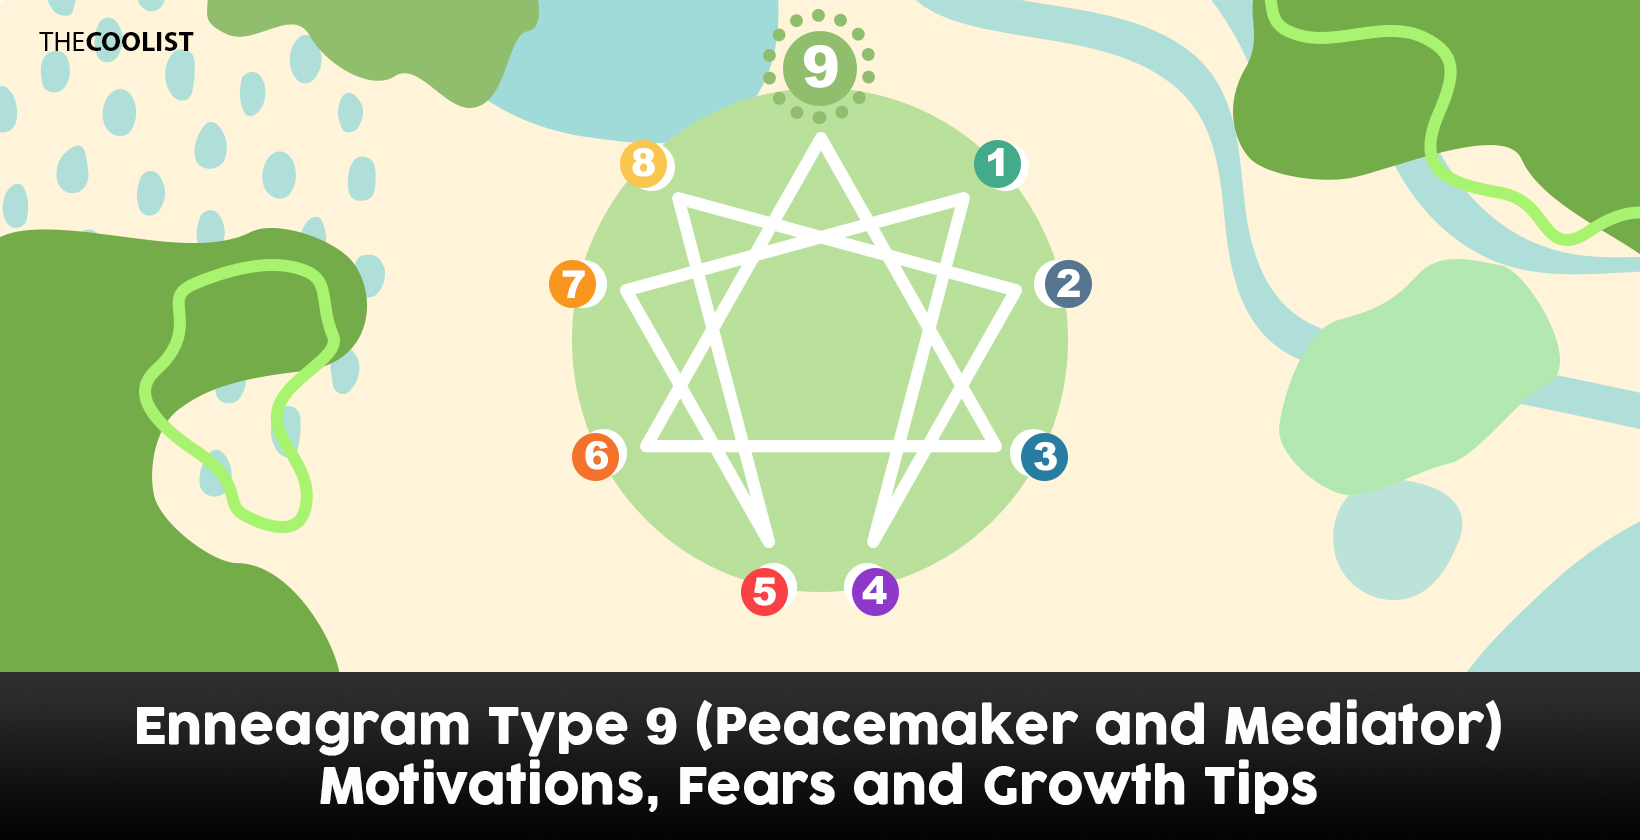 Enneagram Type 9 (Peacemaker and Mediator) Motivations, Fears and Levels of Development